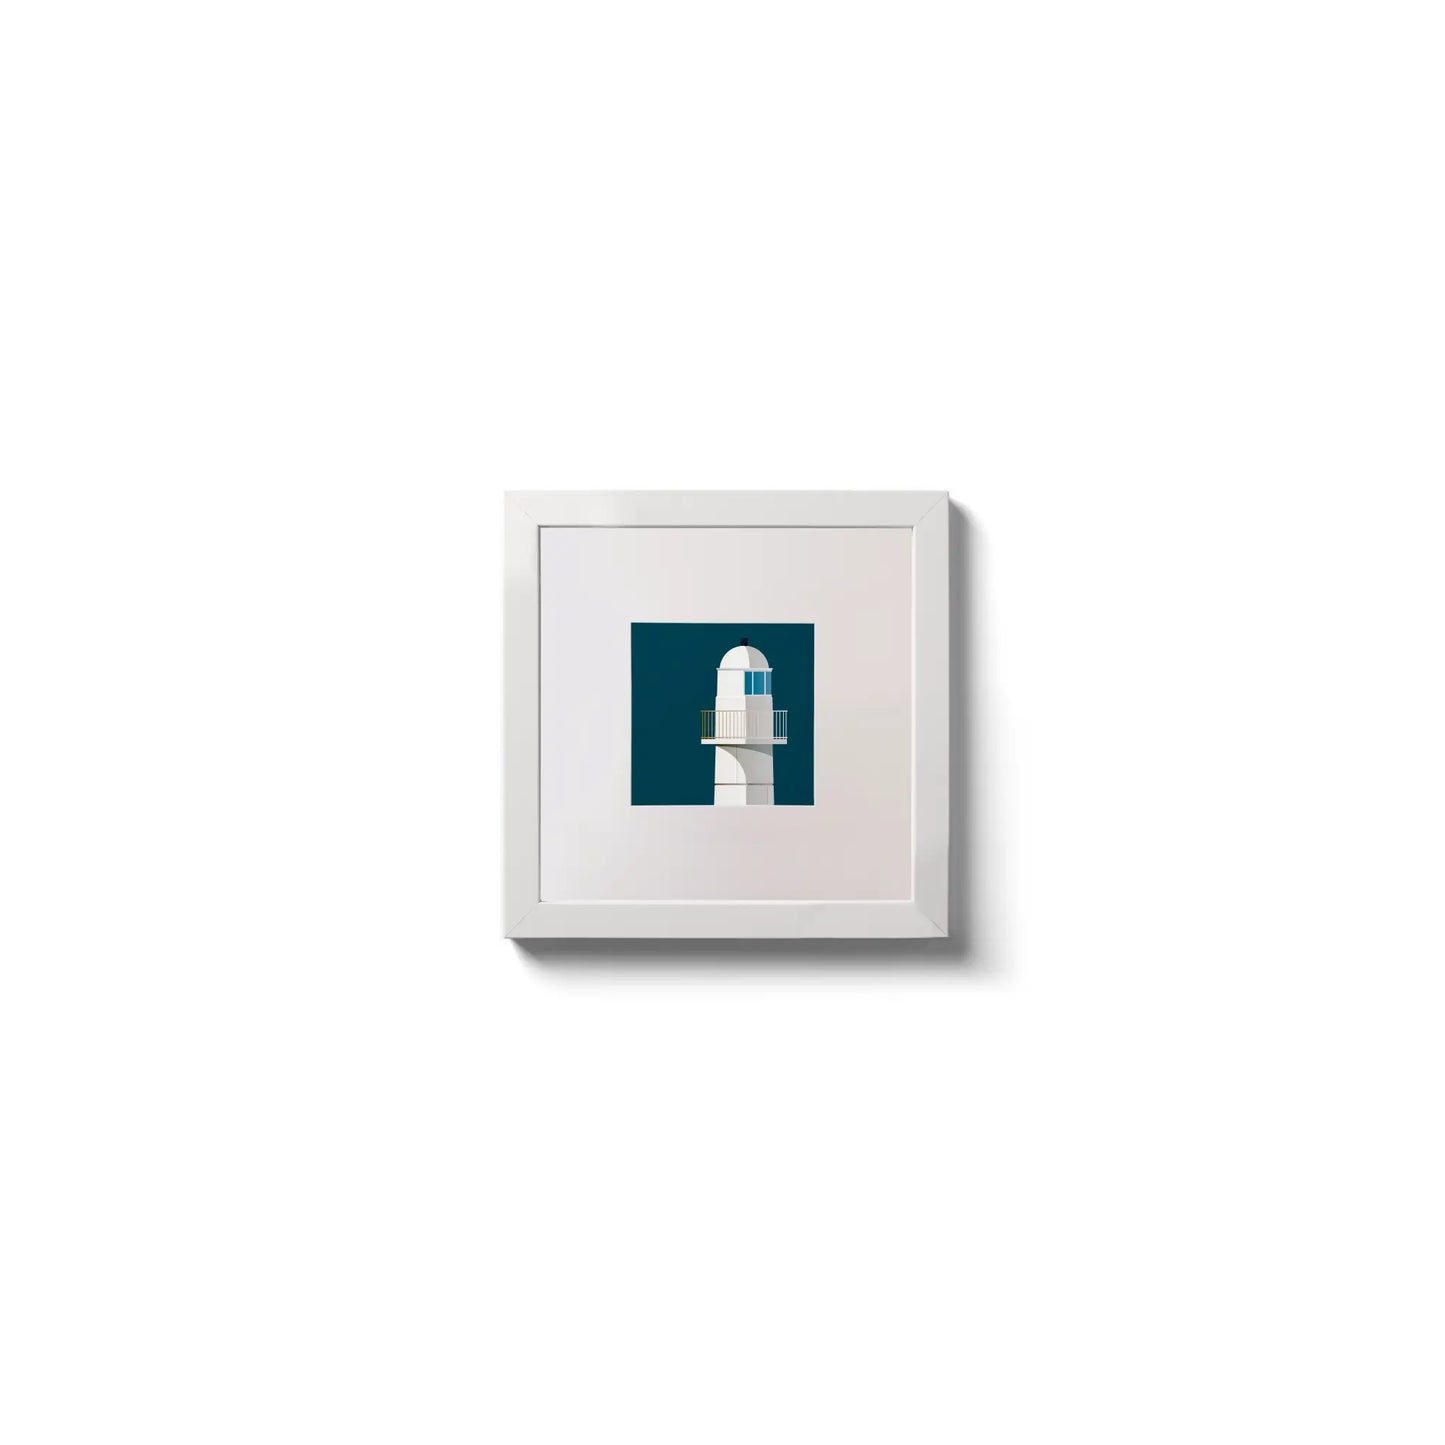 Illustration of Dingle lighthouse on a midnight blue background,  in a white square frame measuring 10x10cm.